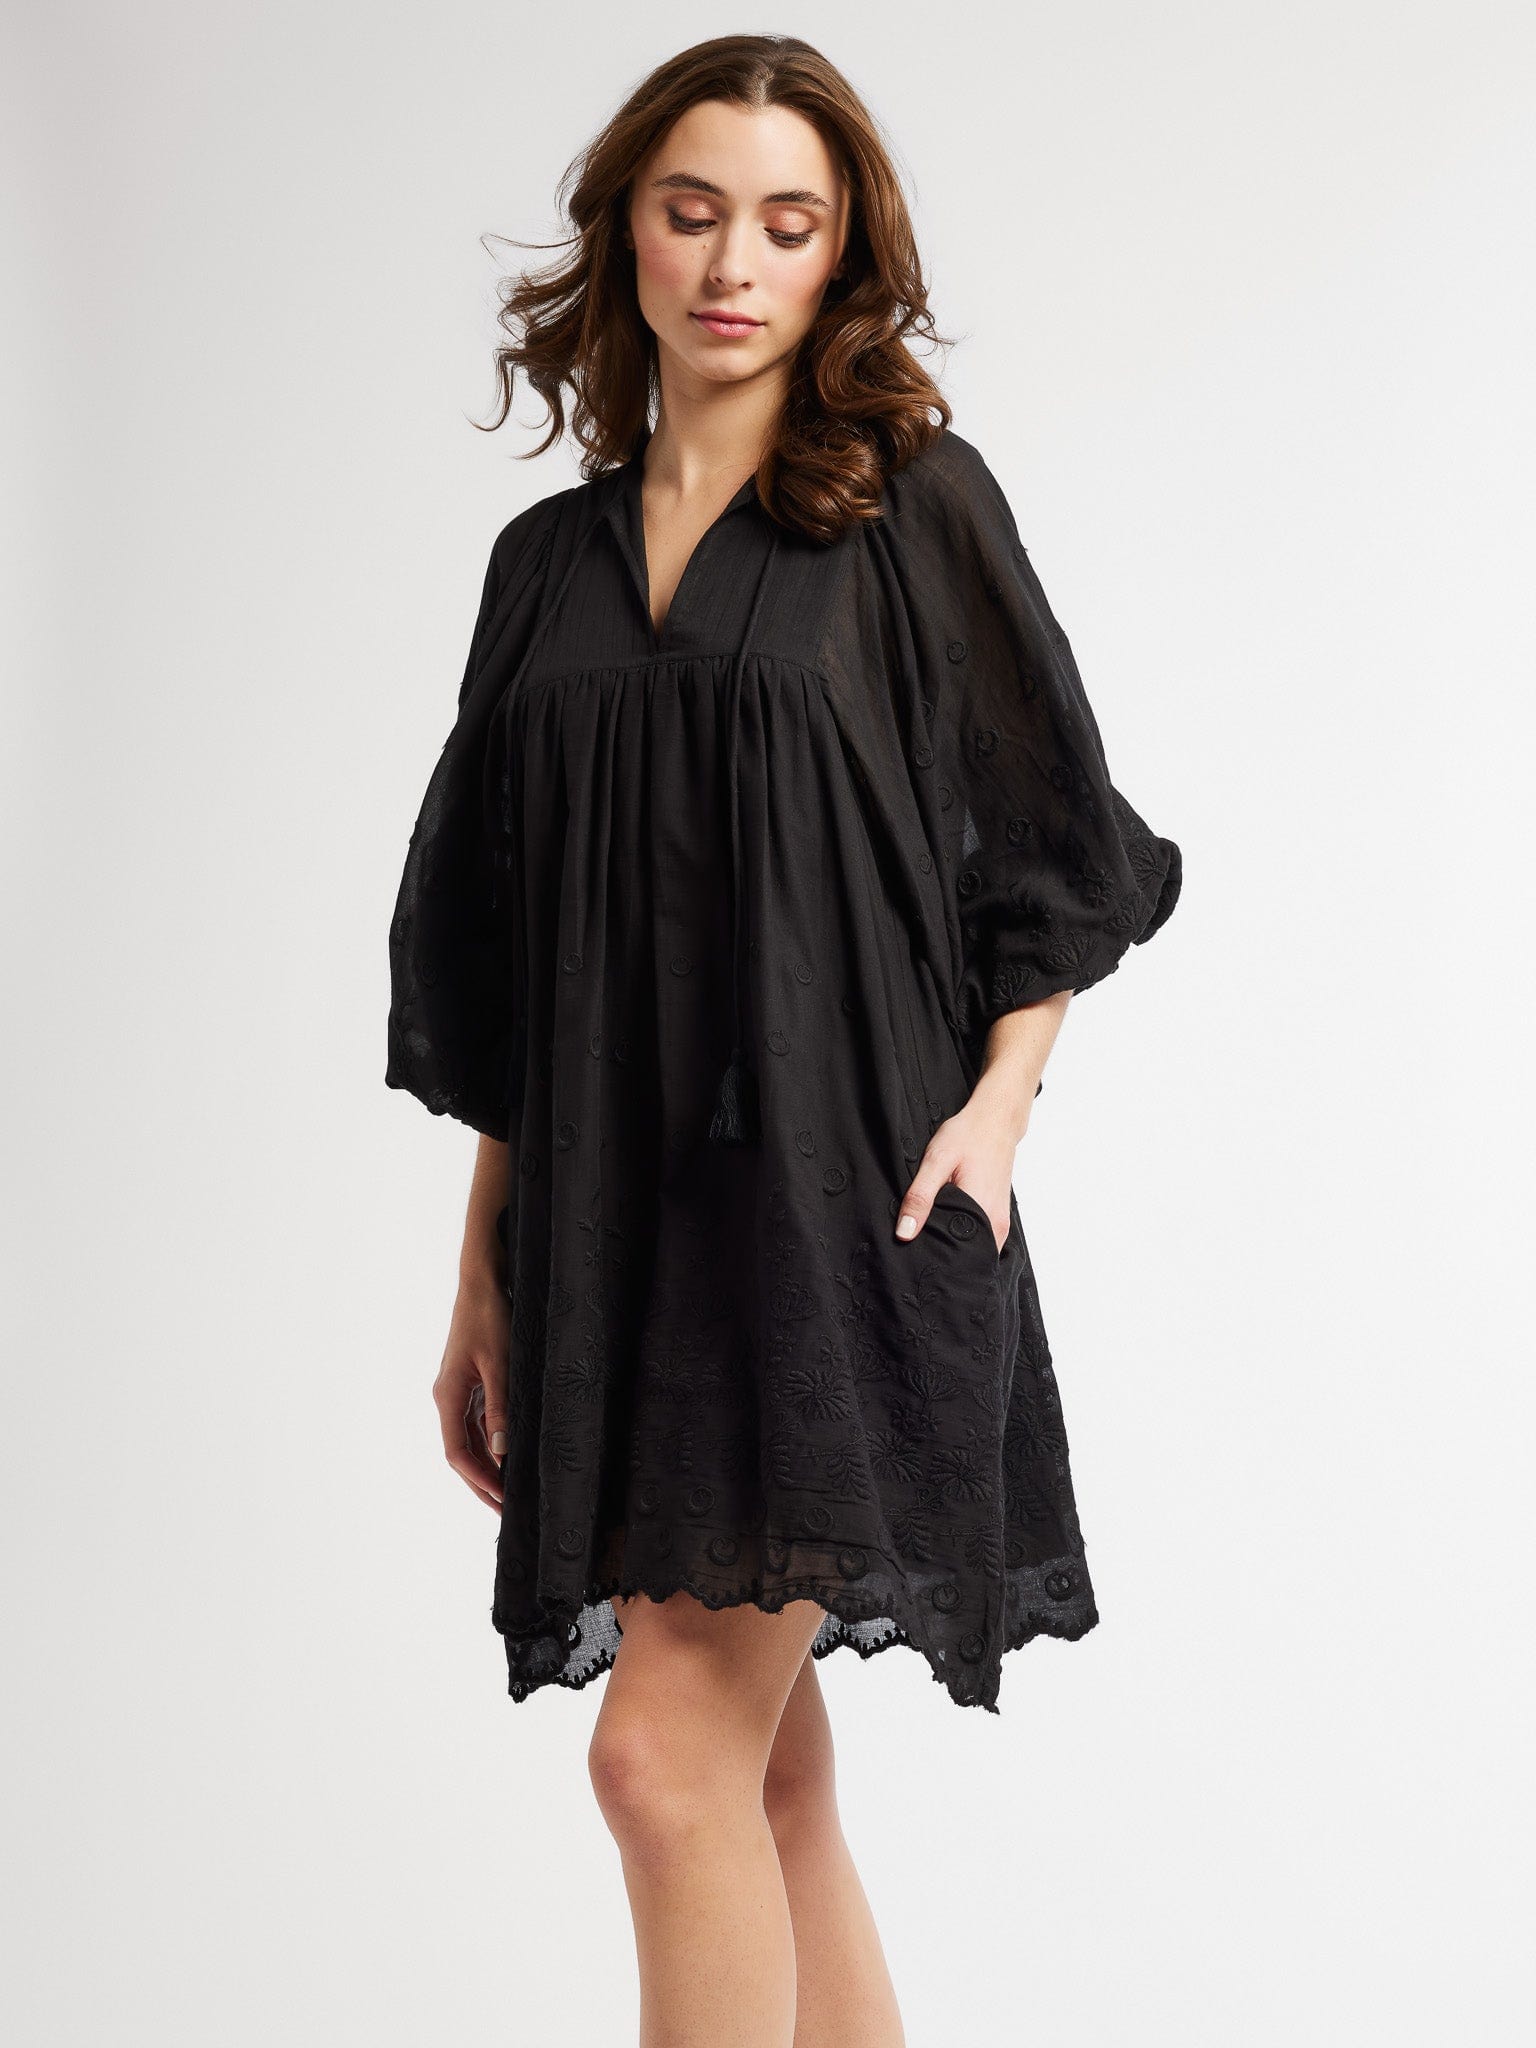 MILLE Clothing Daisy Dress in Black Petal Embroidery